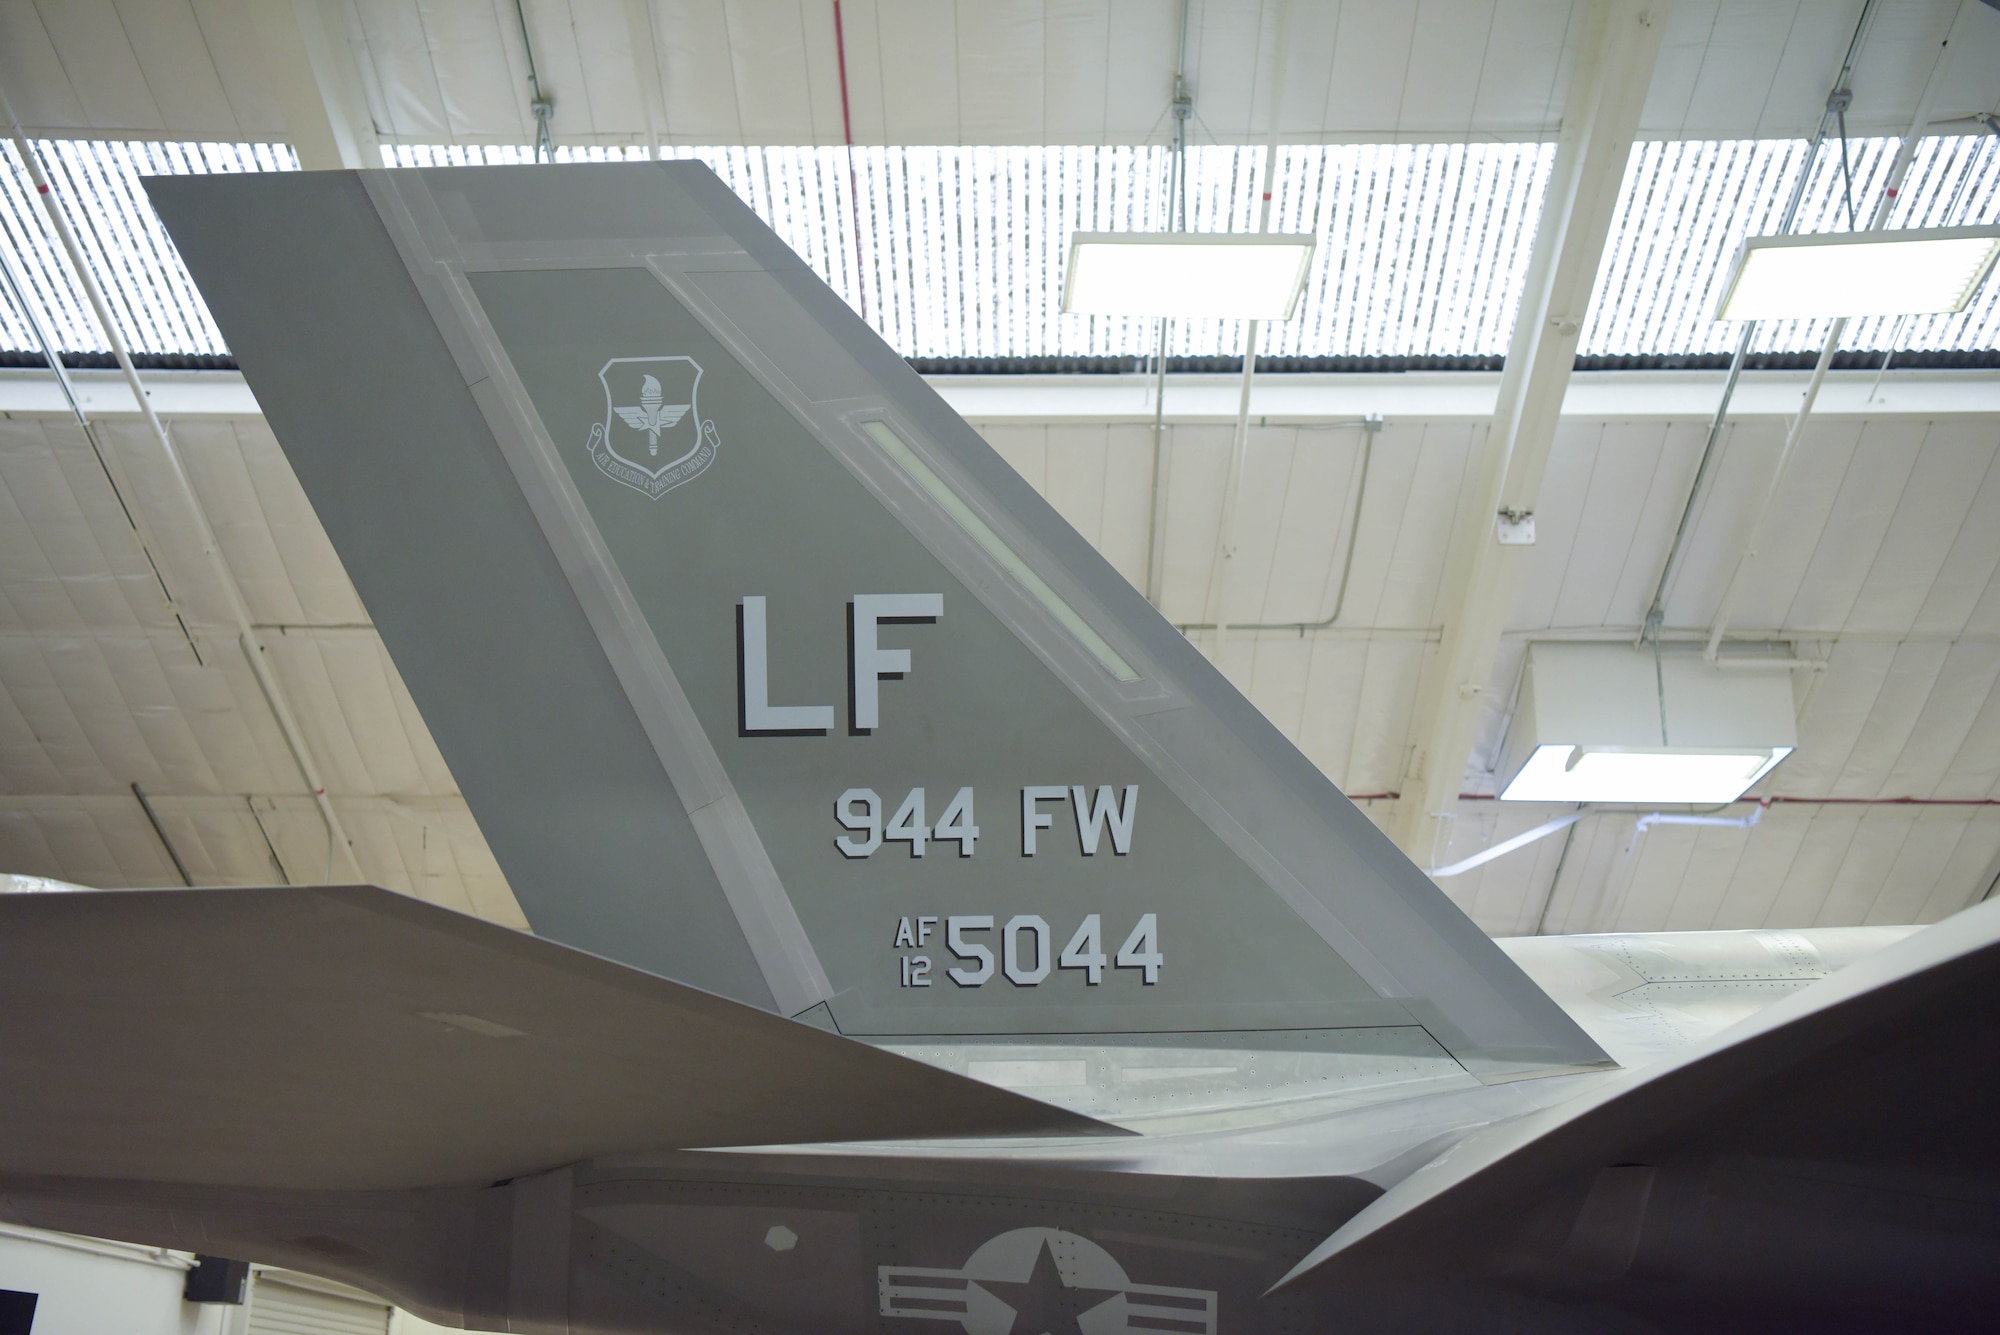 The first F-35 Lightning II flagship for the 944th Fighter Wing was unveiled Nov. 3, 2019 here.